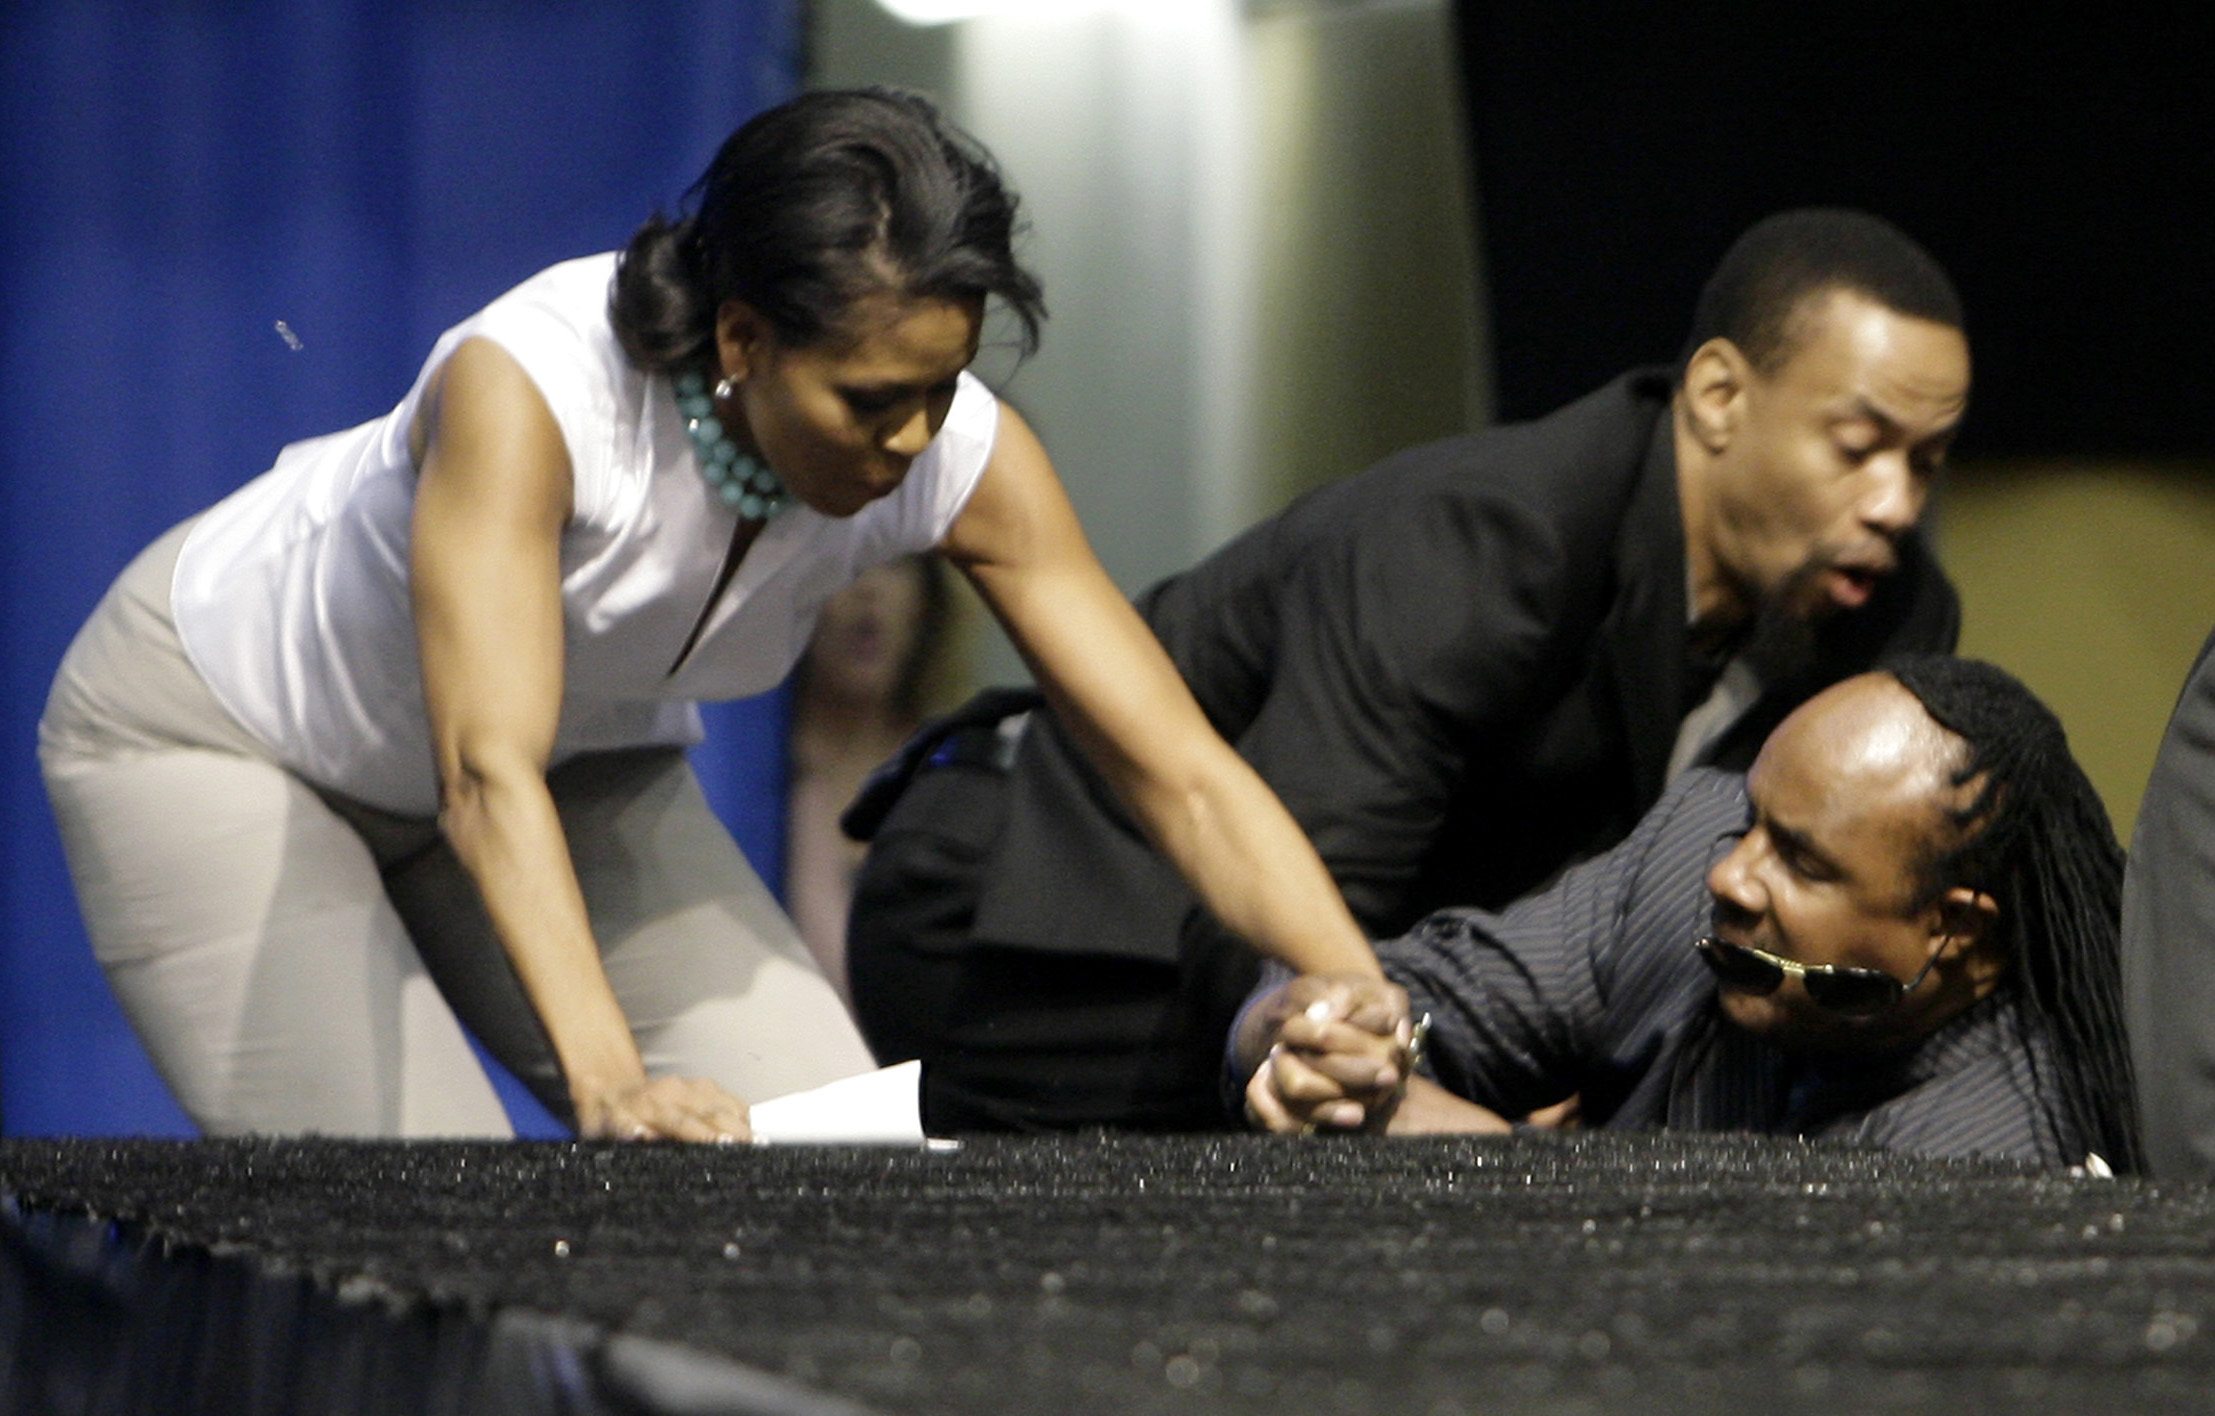 Michelle Obama and singer Stevie Wonder fall as they go up steps to the stage at UCLA's Pauley Pavilion